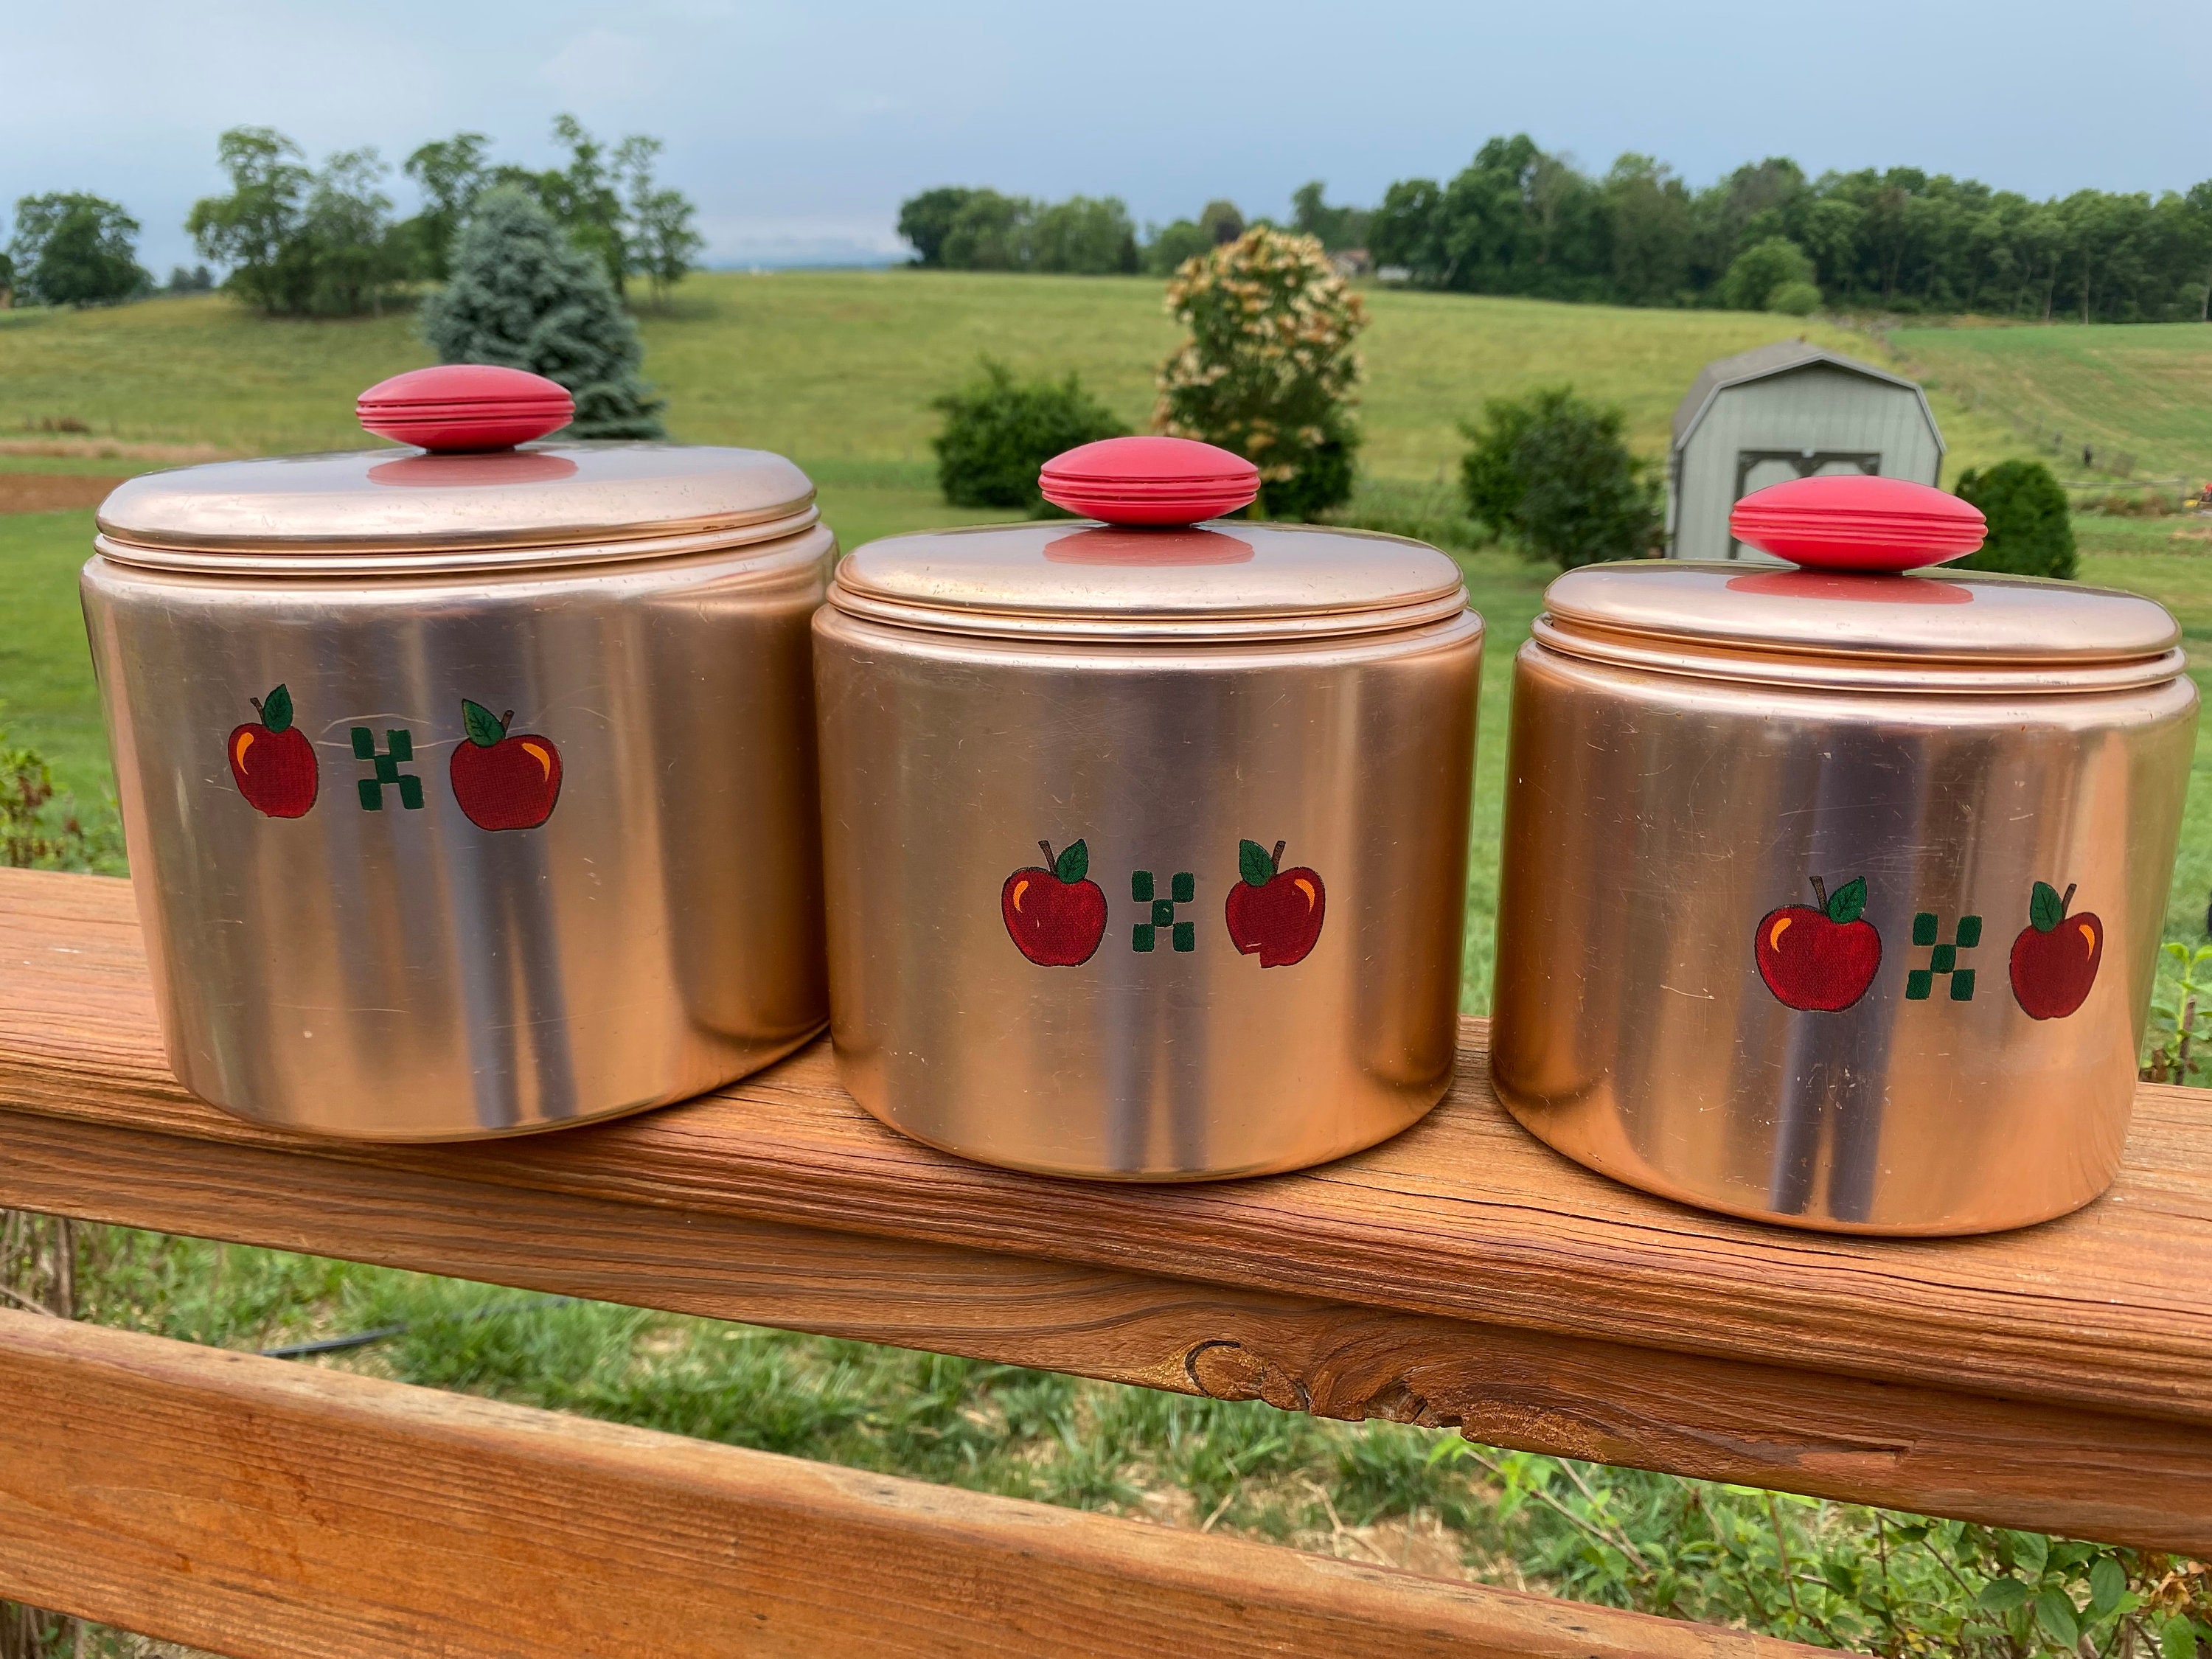 Vintage Mirro Aluminum Canisters Vintage Kitchen Kitchen Storage MCM Apple Motif Lidded Canister With Red Finial Set of 3 Rose Gold